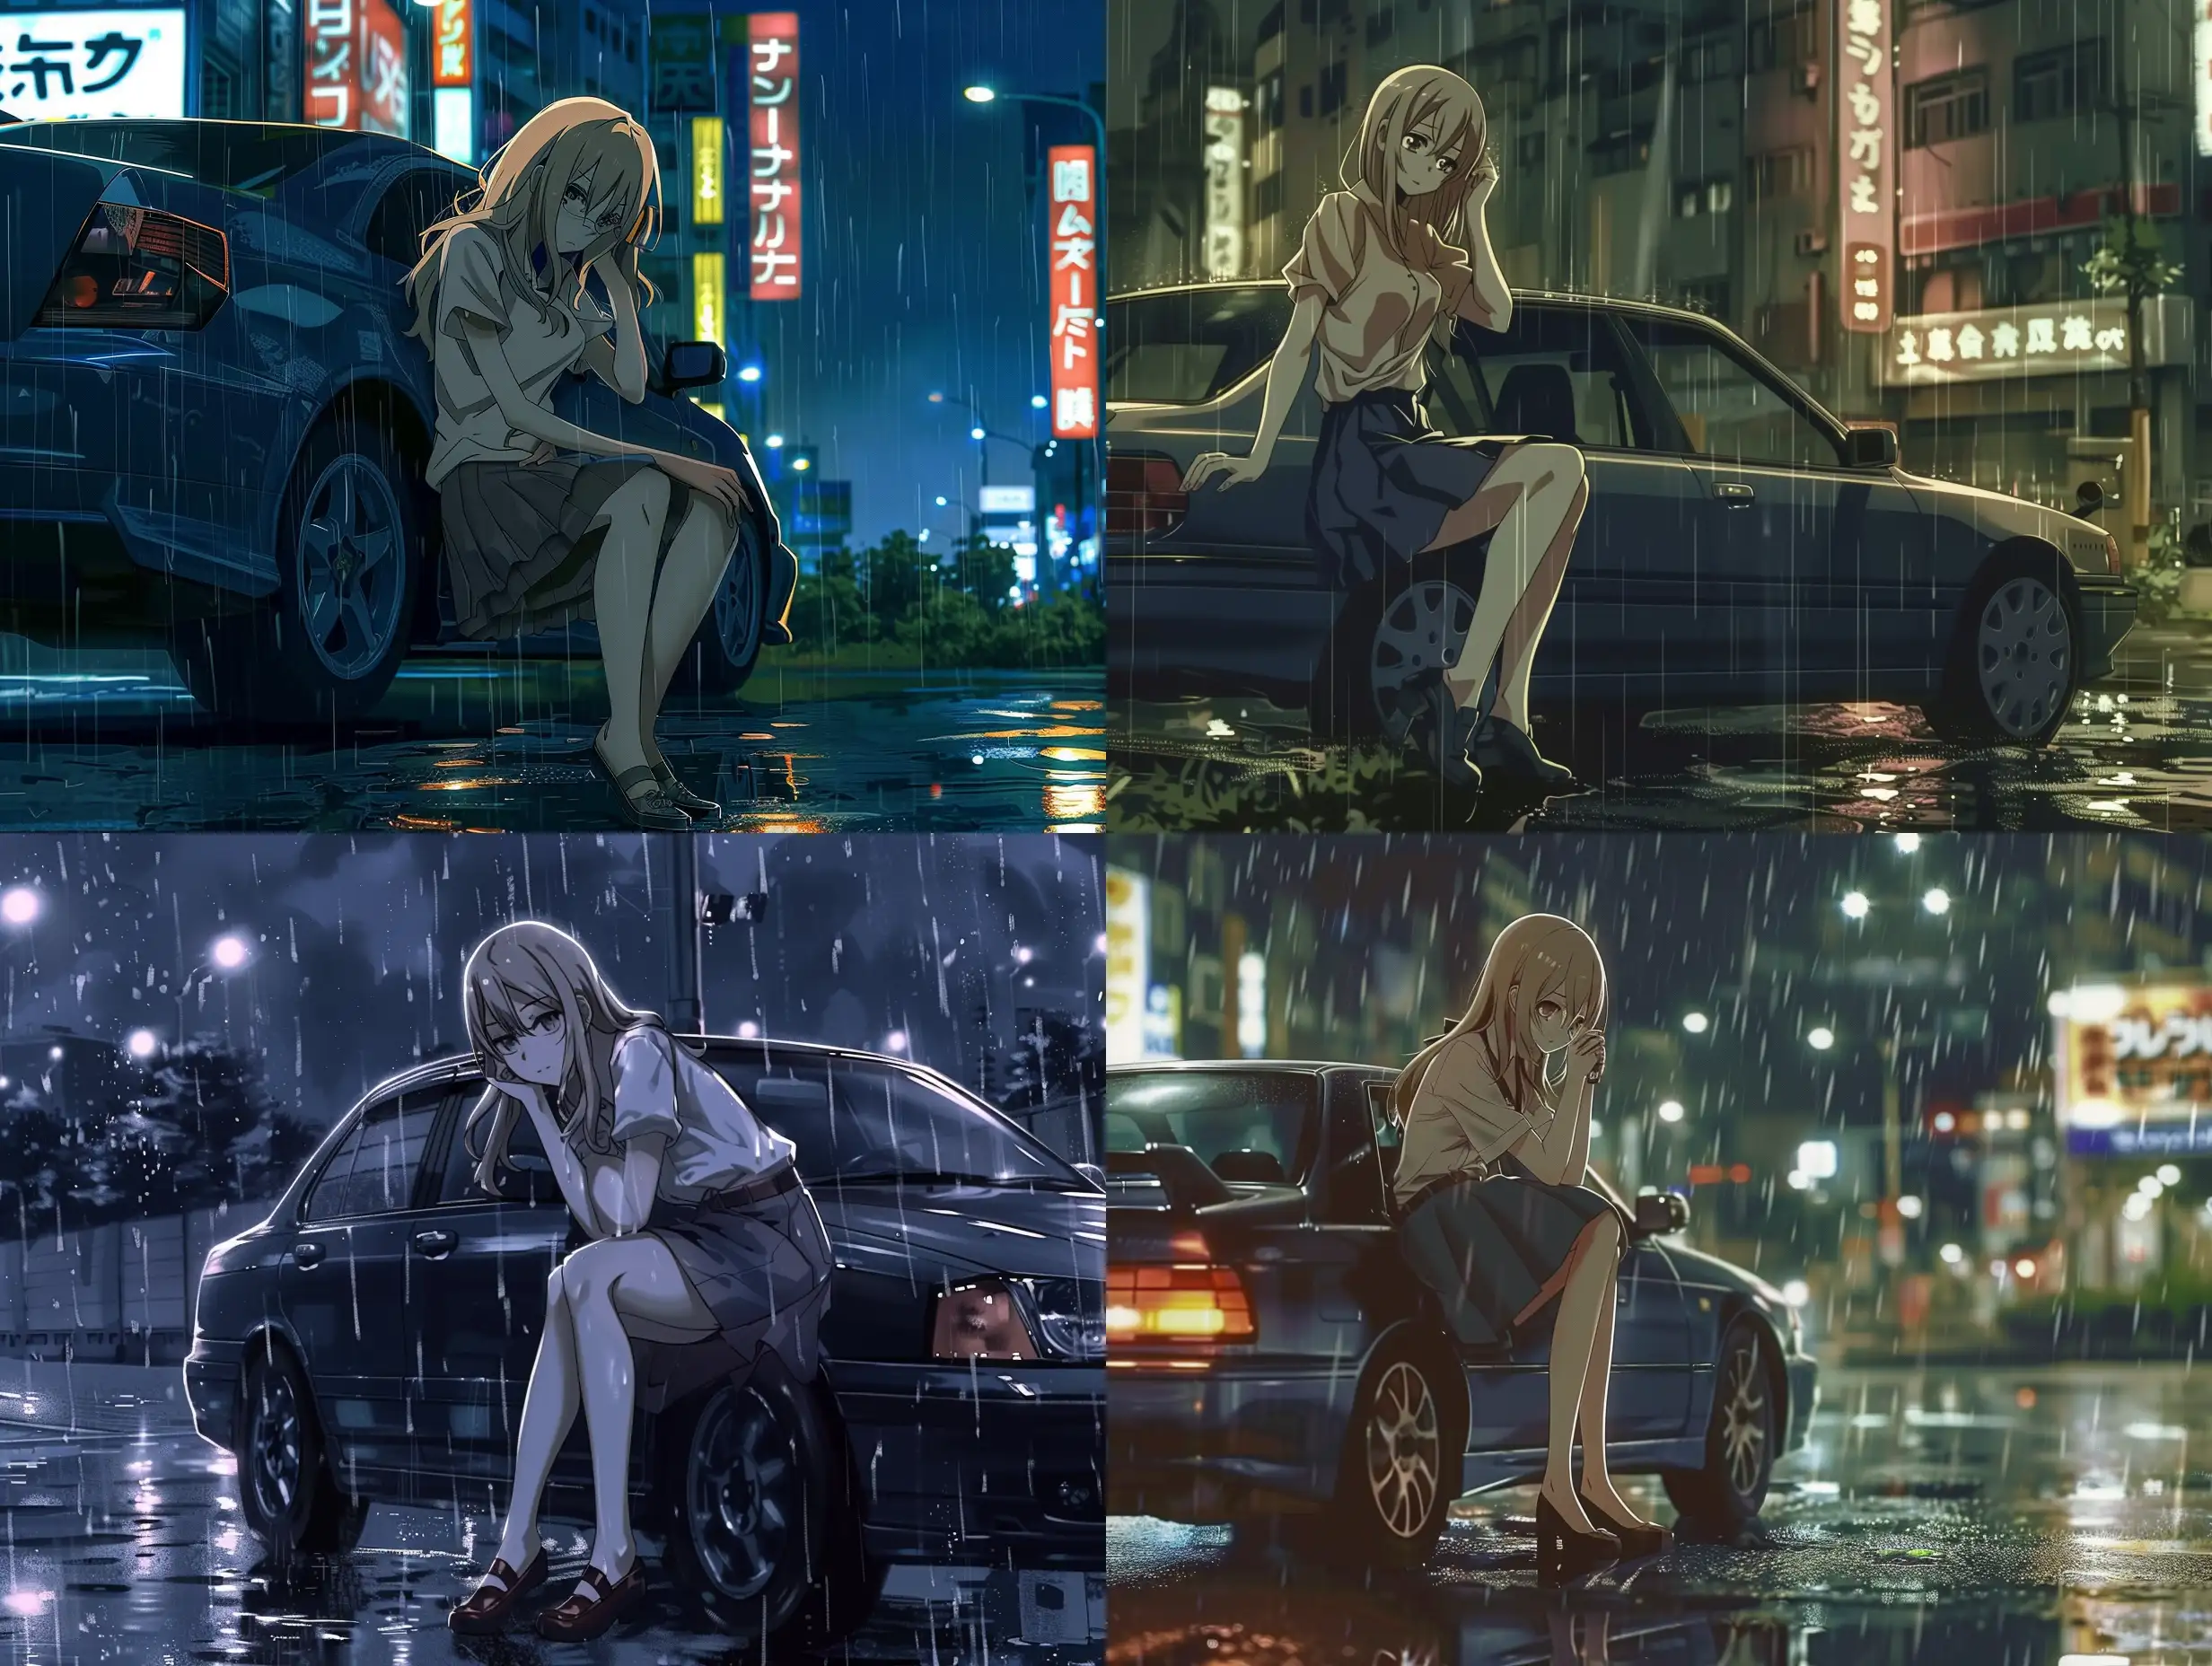 Anime-Cyberpunk-Scene-with-Character-Leaning-on-Car-in-Rainy-Urban-Setting